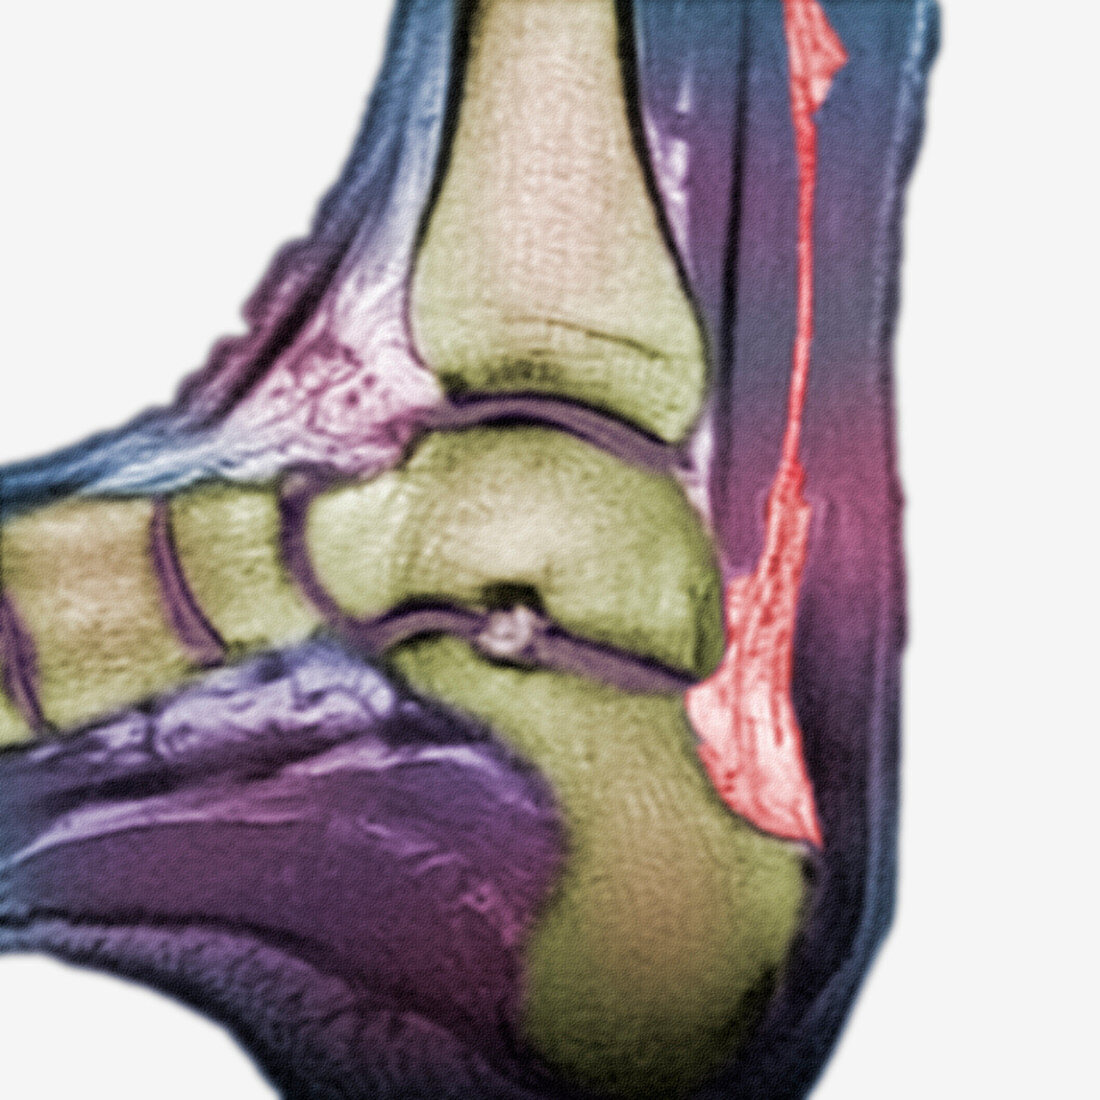 MRI of a rupture of the Achilles Tendon